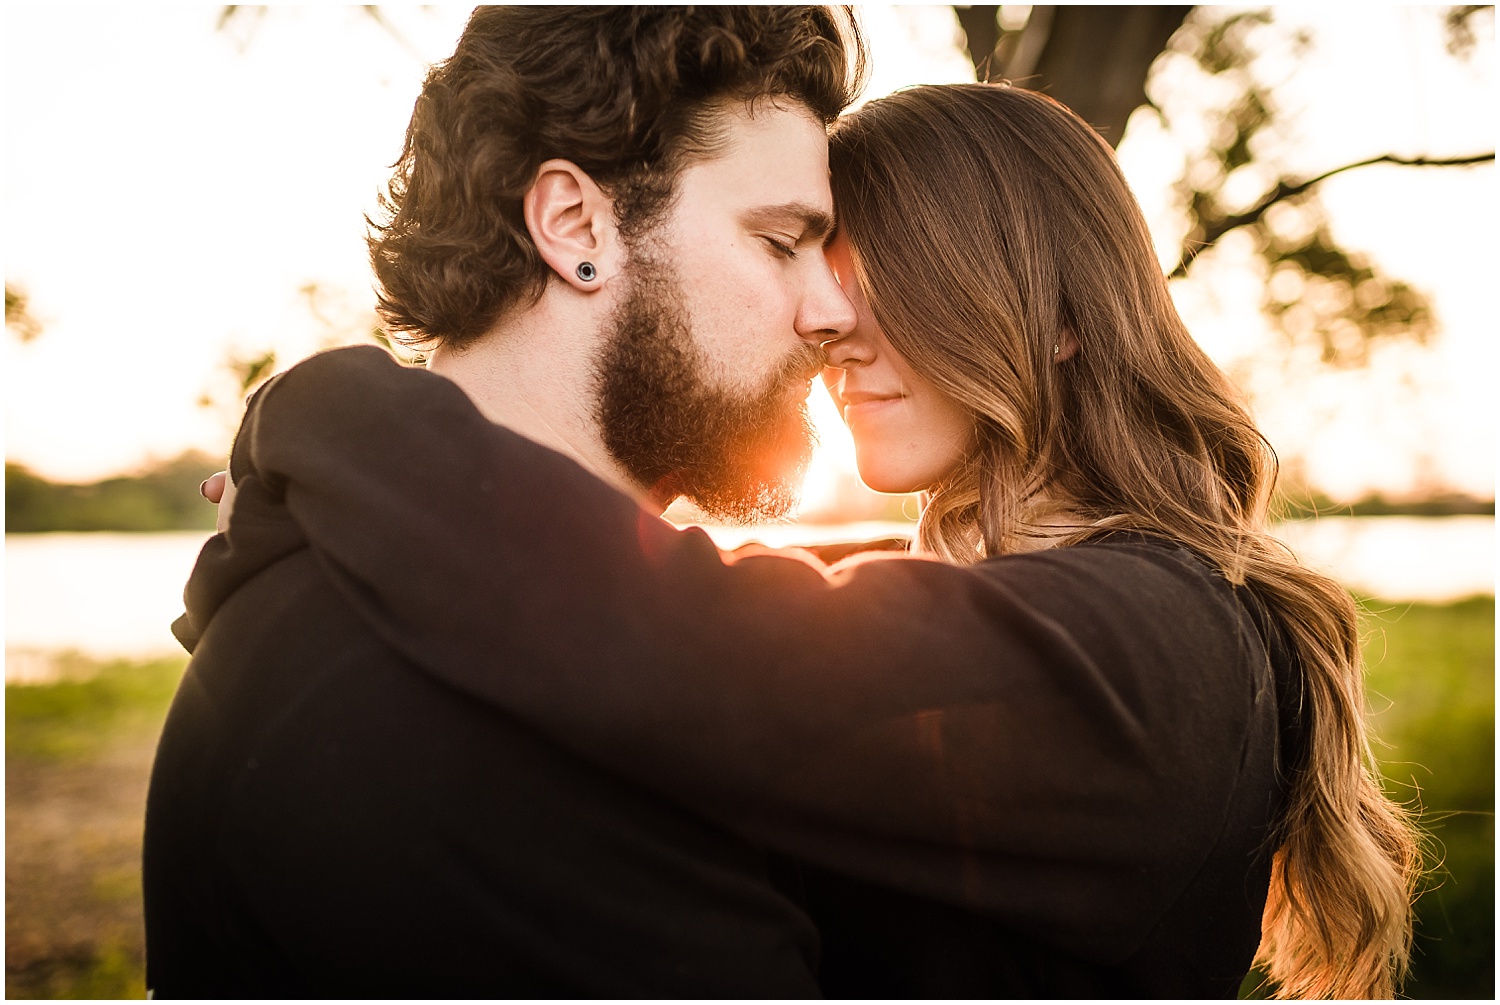  A close-up photograph of a couple embracing with the sun glowing between their faces.  